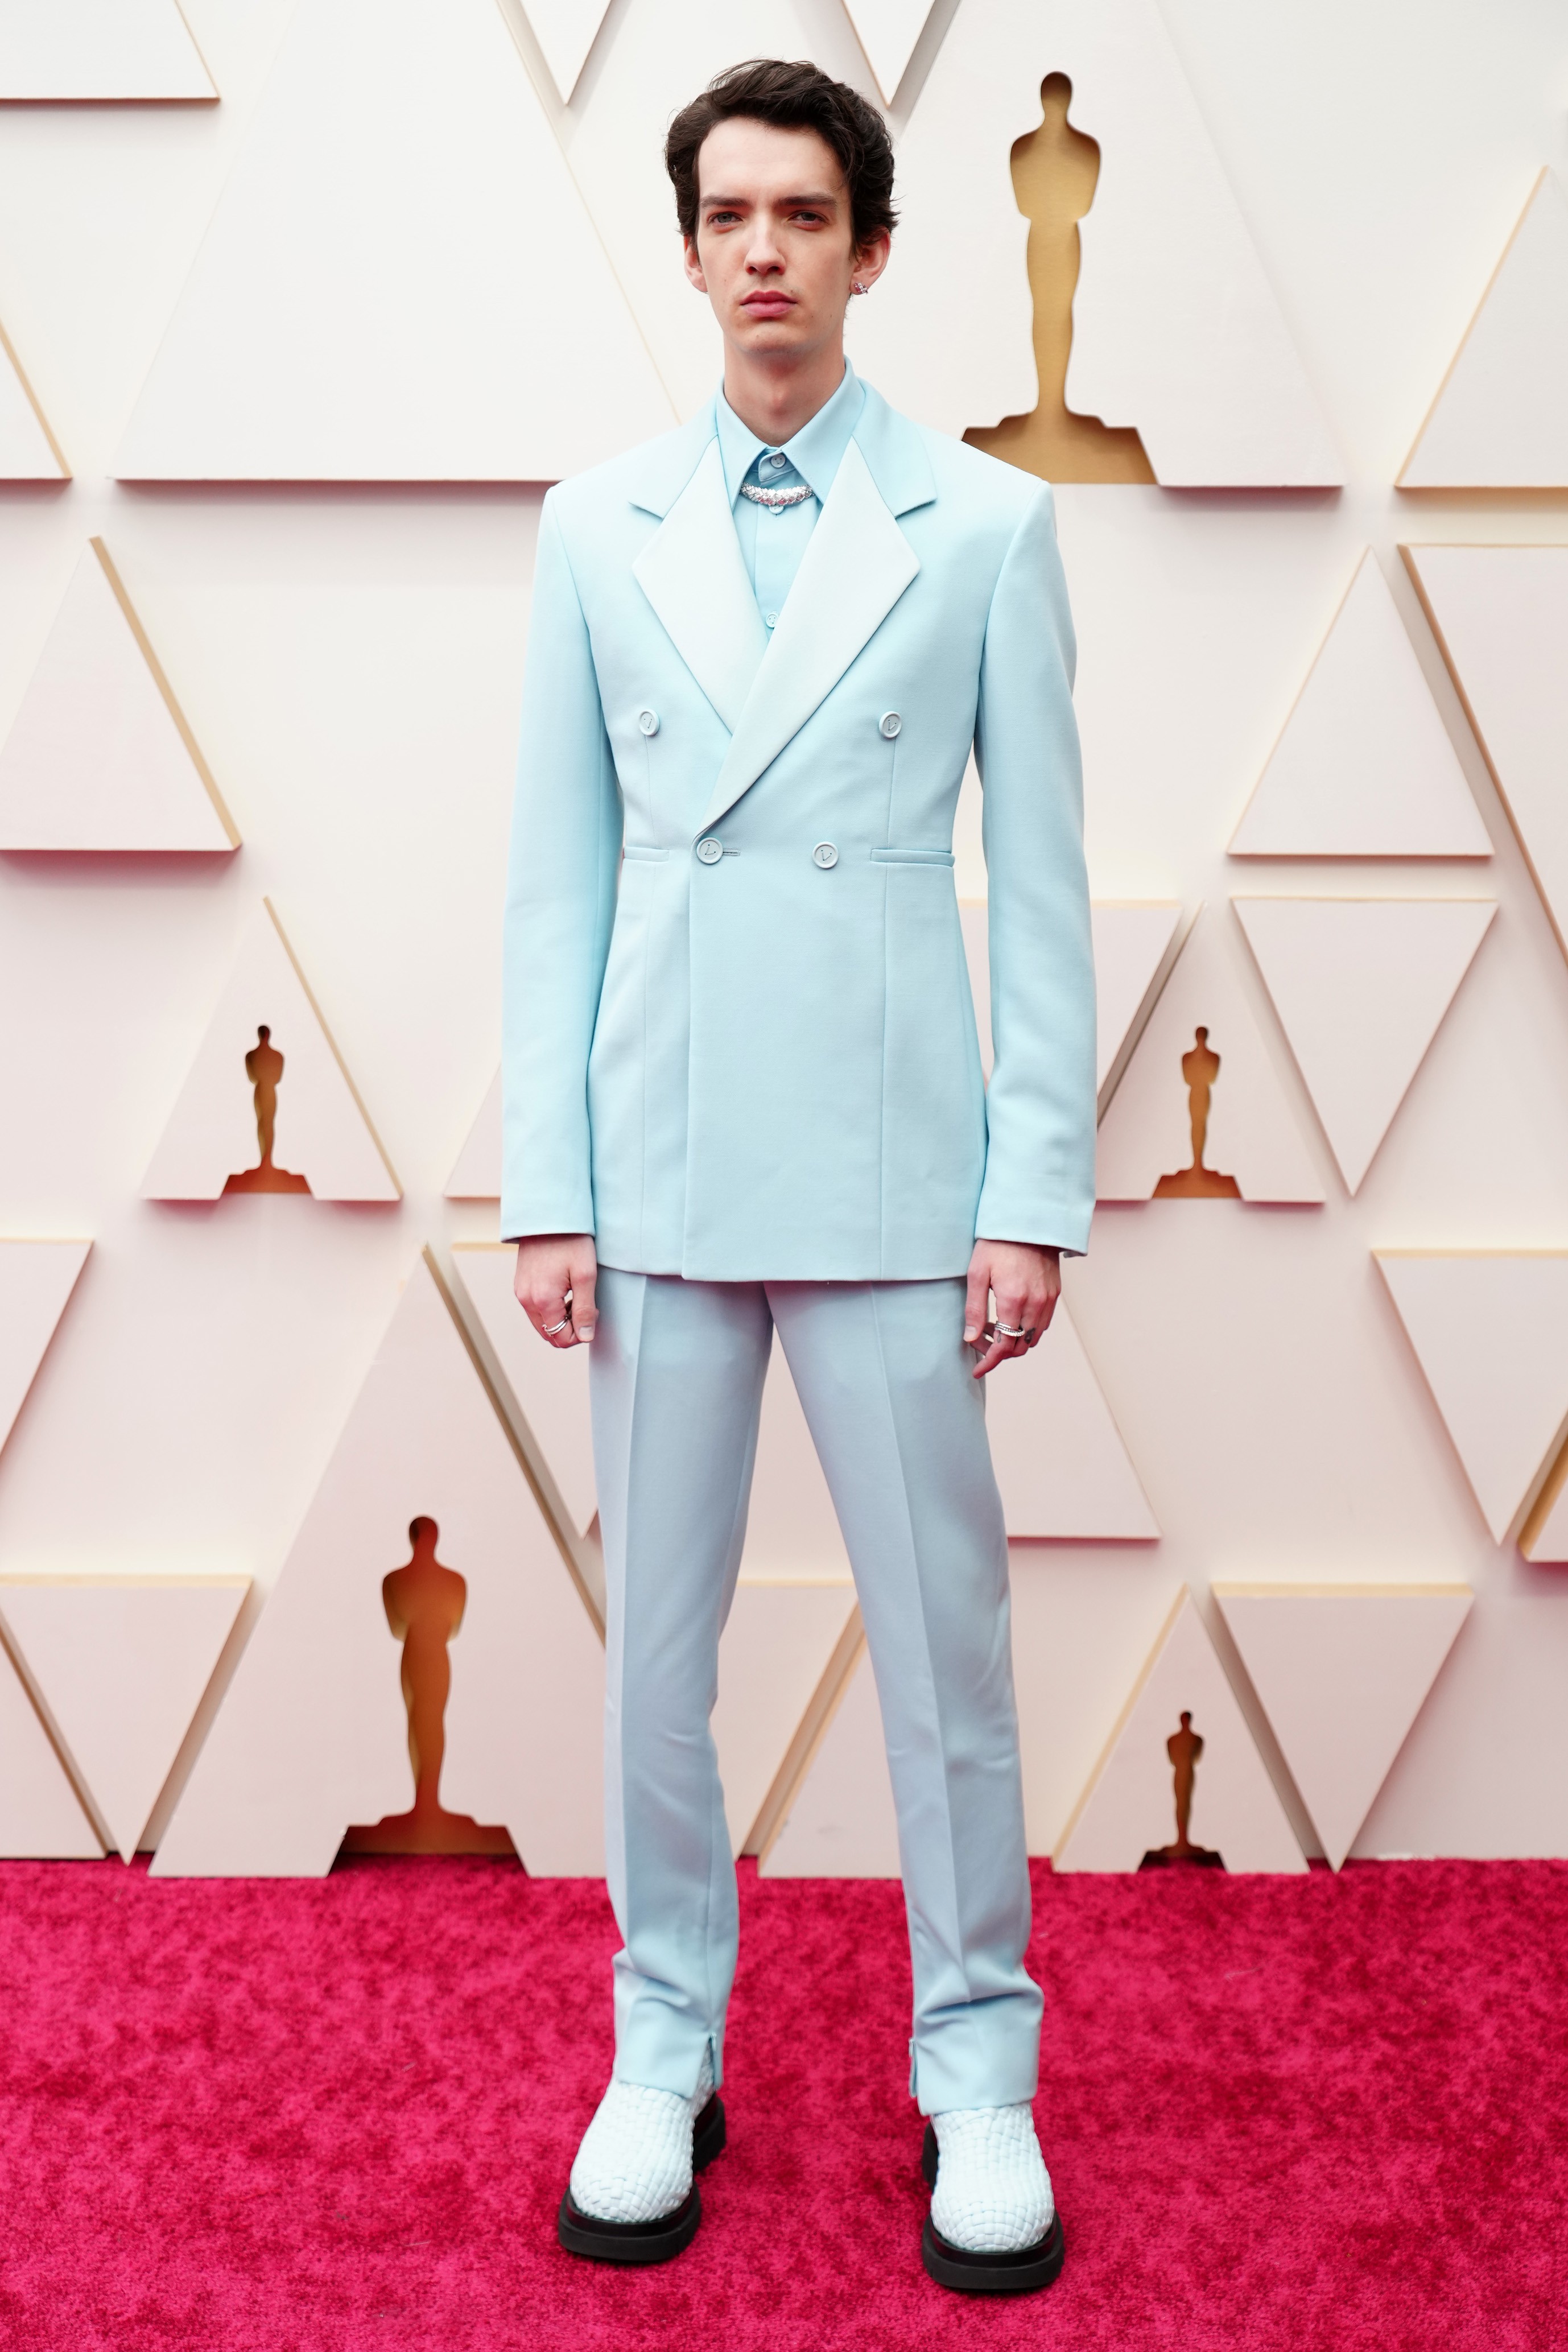 HOLLYWOOD, CALIFORNIA - MARCH 27: Kodi Smit-McPhee attends the 94th Annual Academy Awards at Hollywood and Highland on March 27, 2022 in Hollywood, California. (Photo by Jeff Kravitz/FilmMagic) (Foto: FilmMagic)